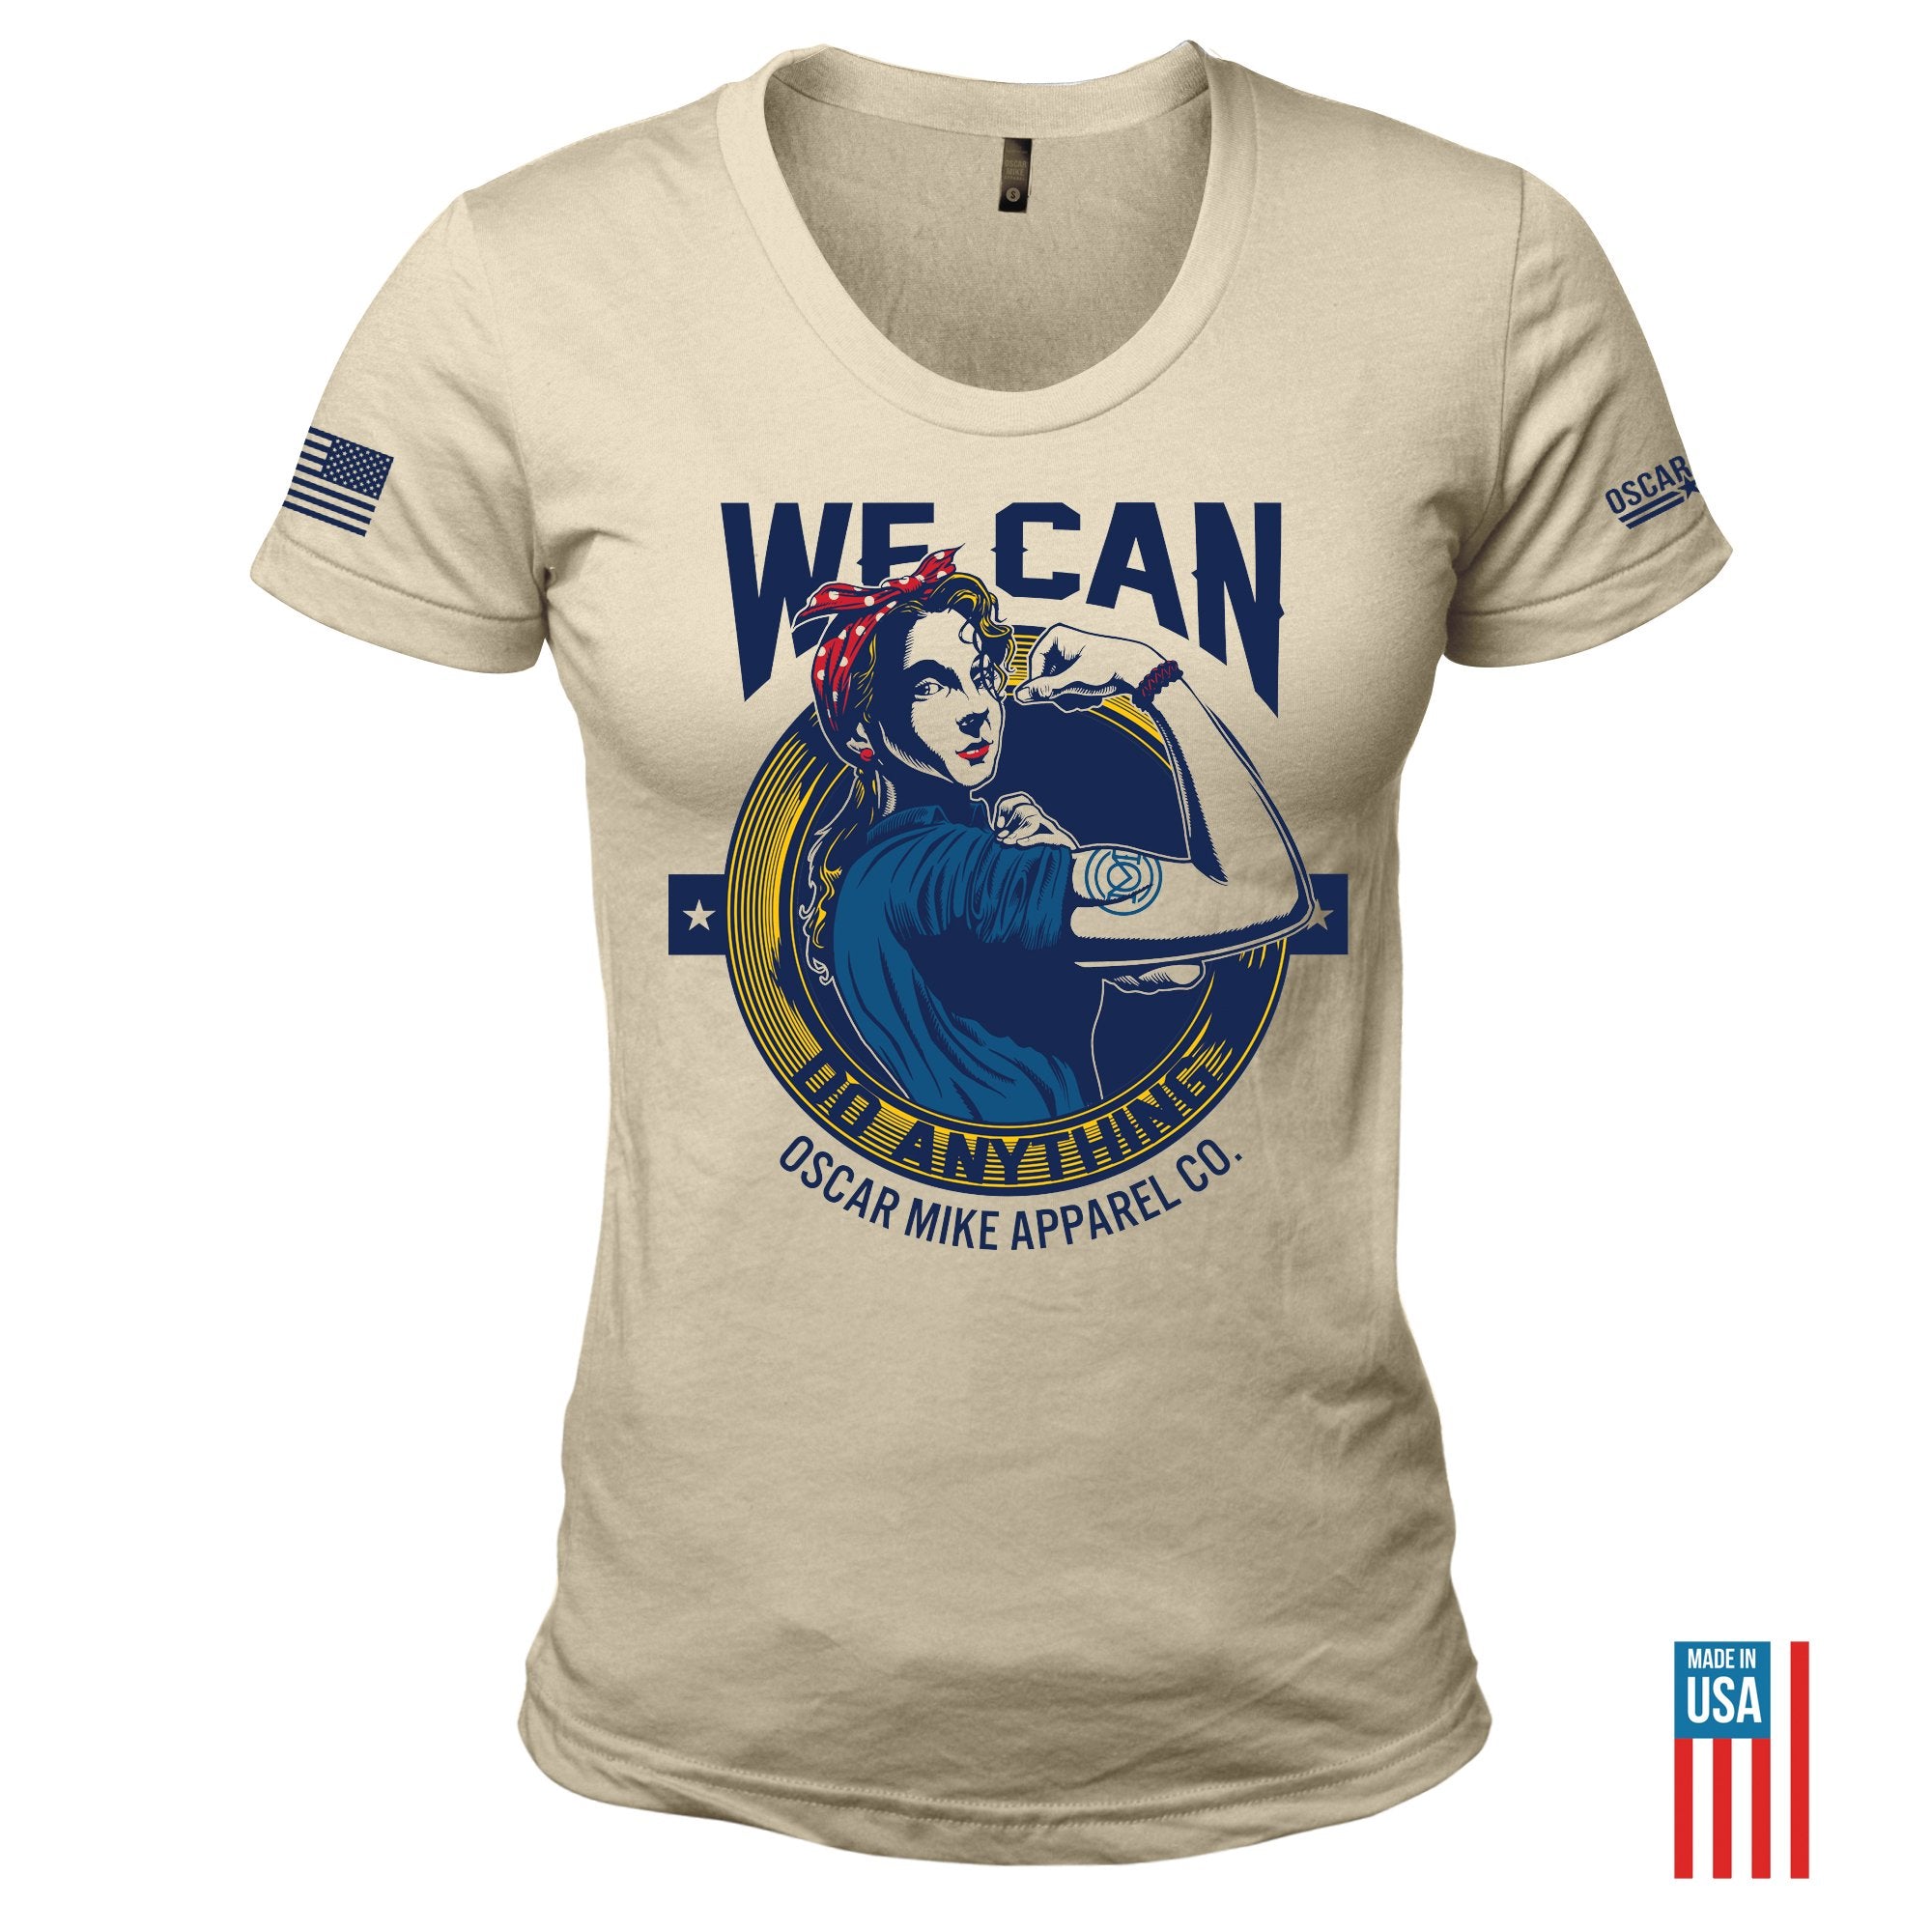 Women's Yes We Can T-Shirt from Oscar Mike Apparel